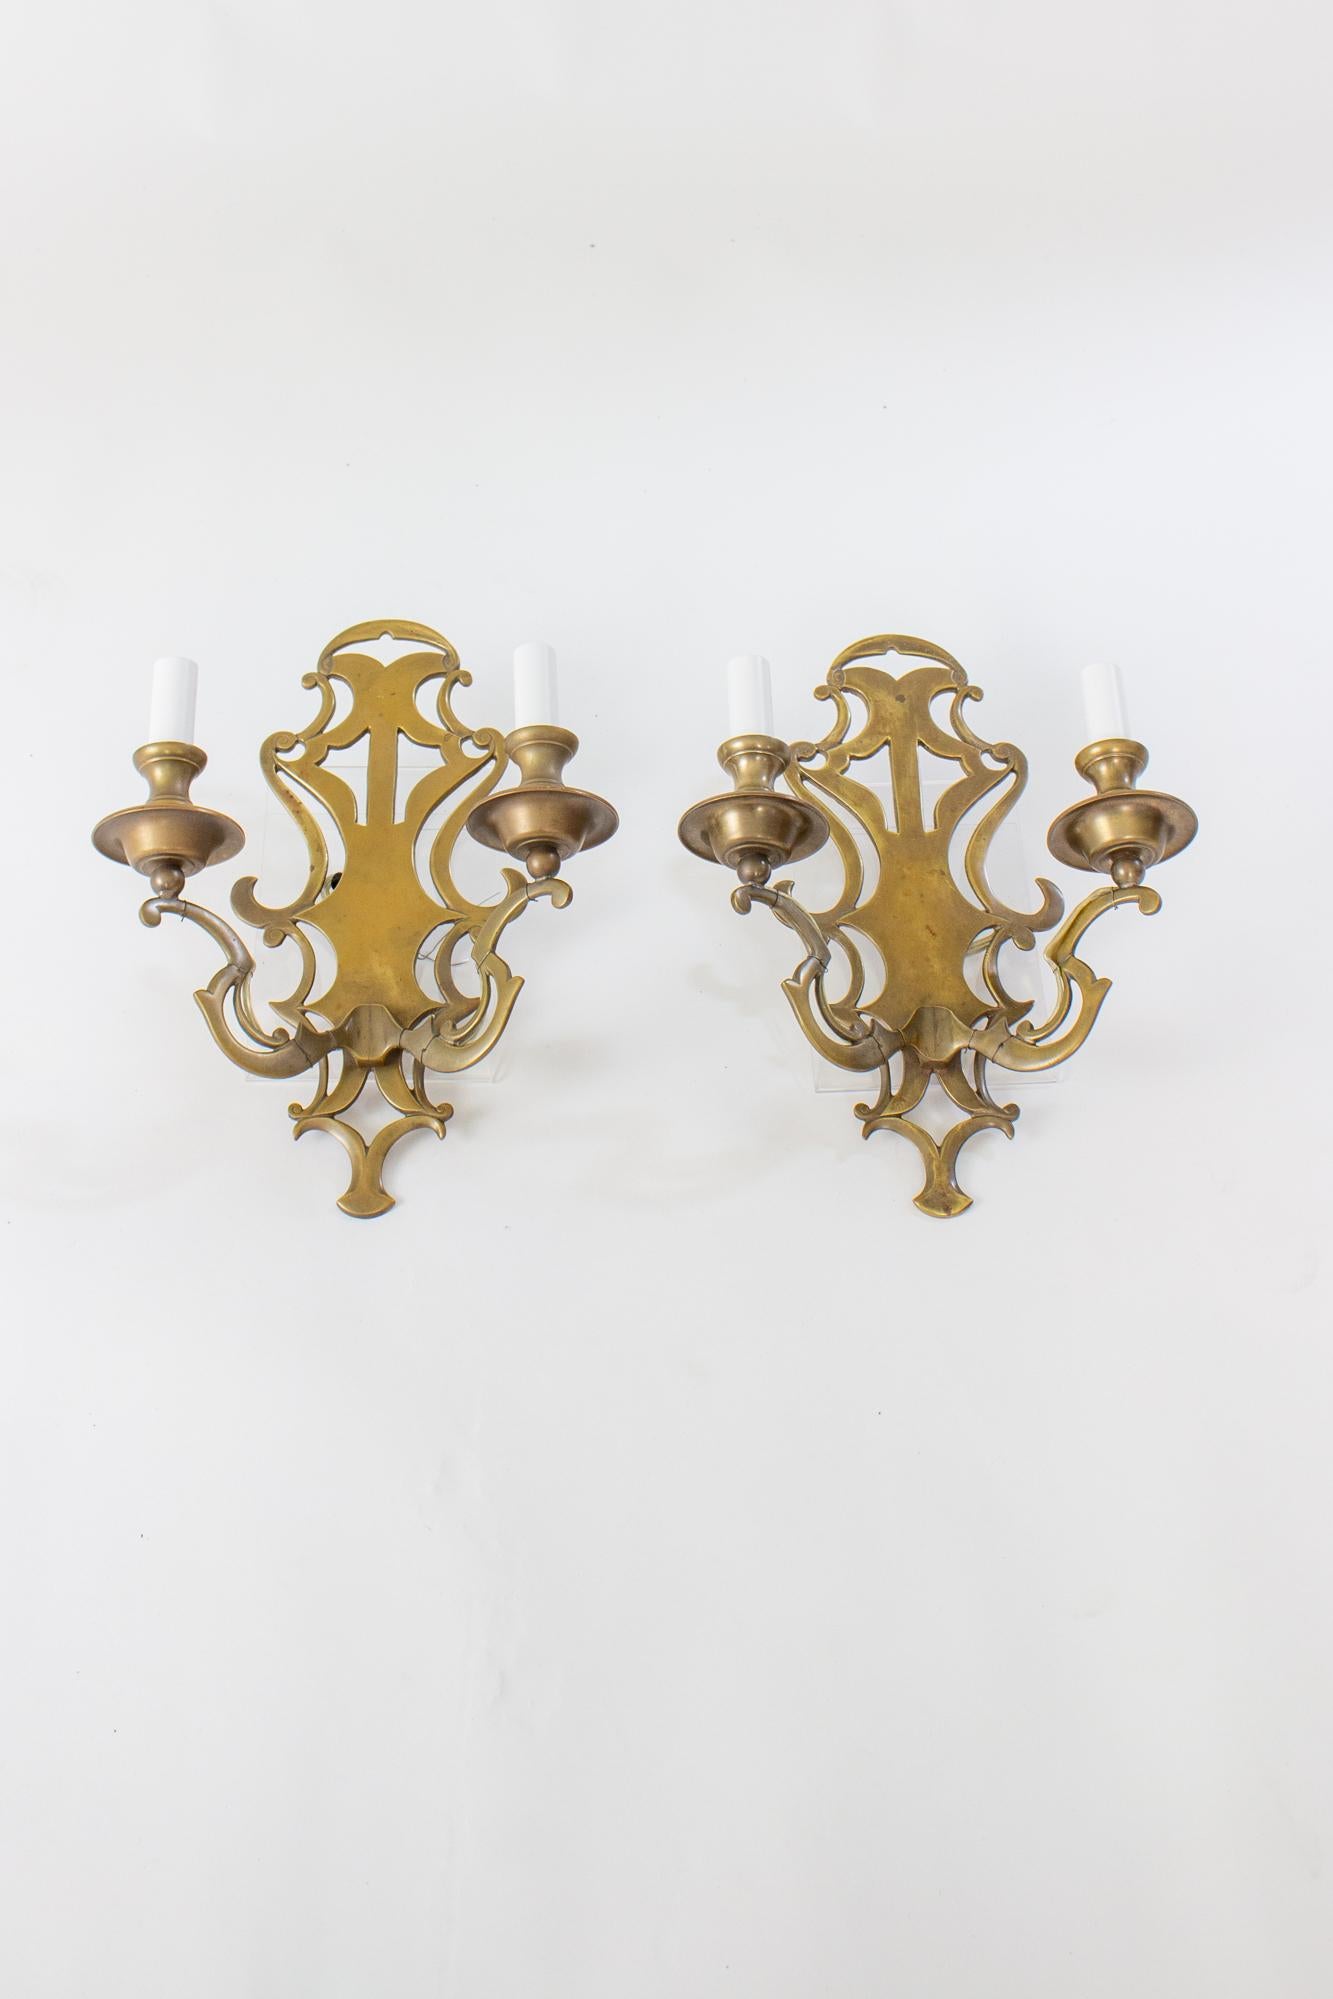 Early 20th Century solid brass sconces, a pair. Flat backplates with cut out pattern. Two arms. All in solid brass with an even natural patina. Rewired with new candlecovers. Originally designed to hang from wall from the top curved element on the